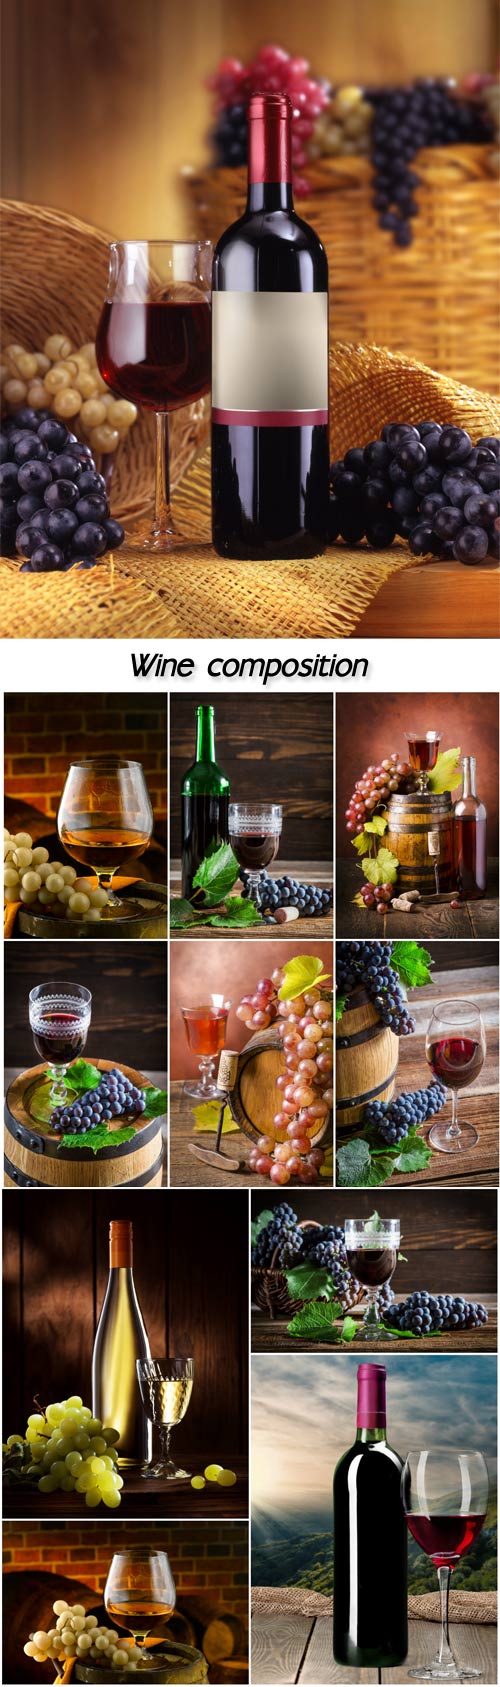 Wine, composition from wine bottles and grapes